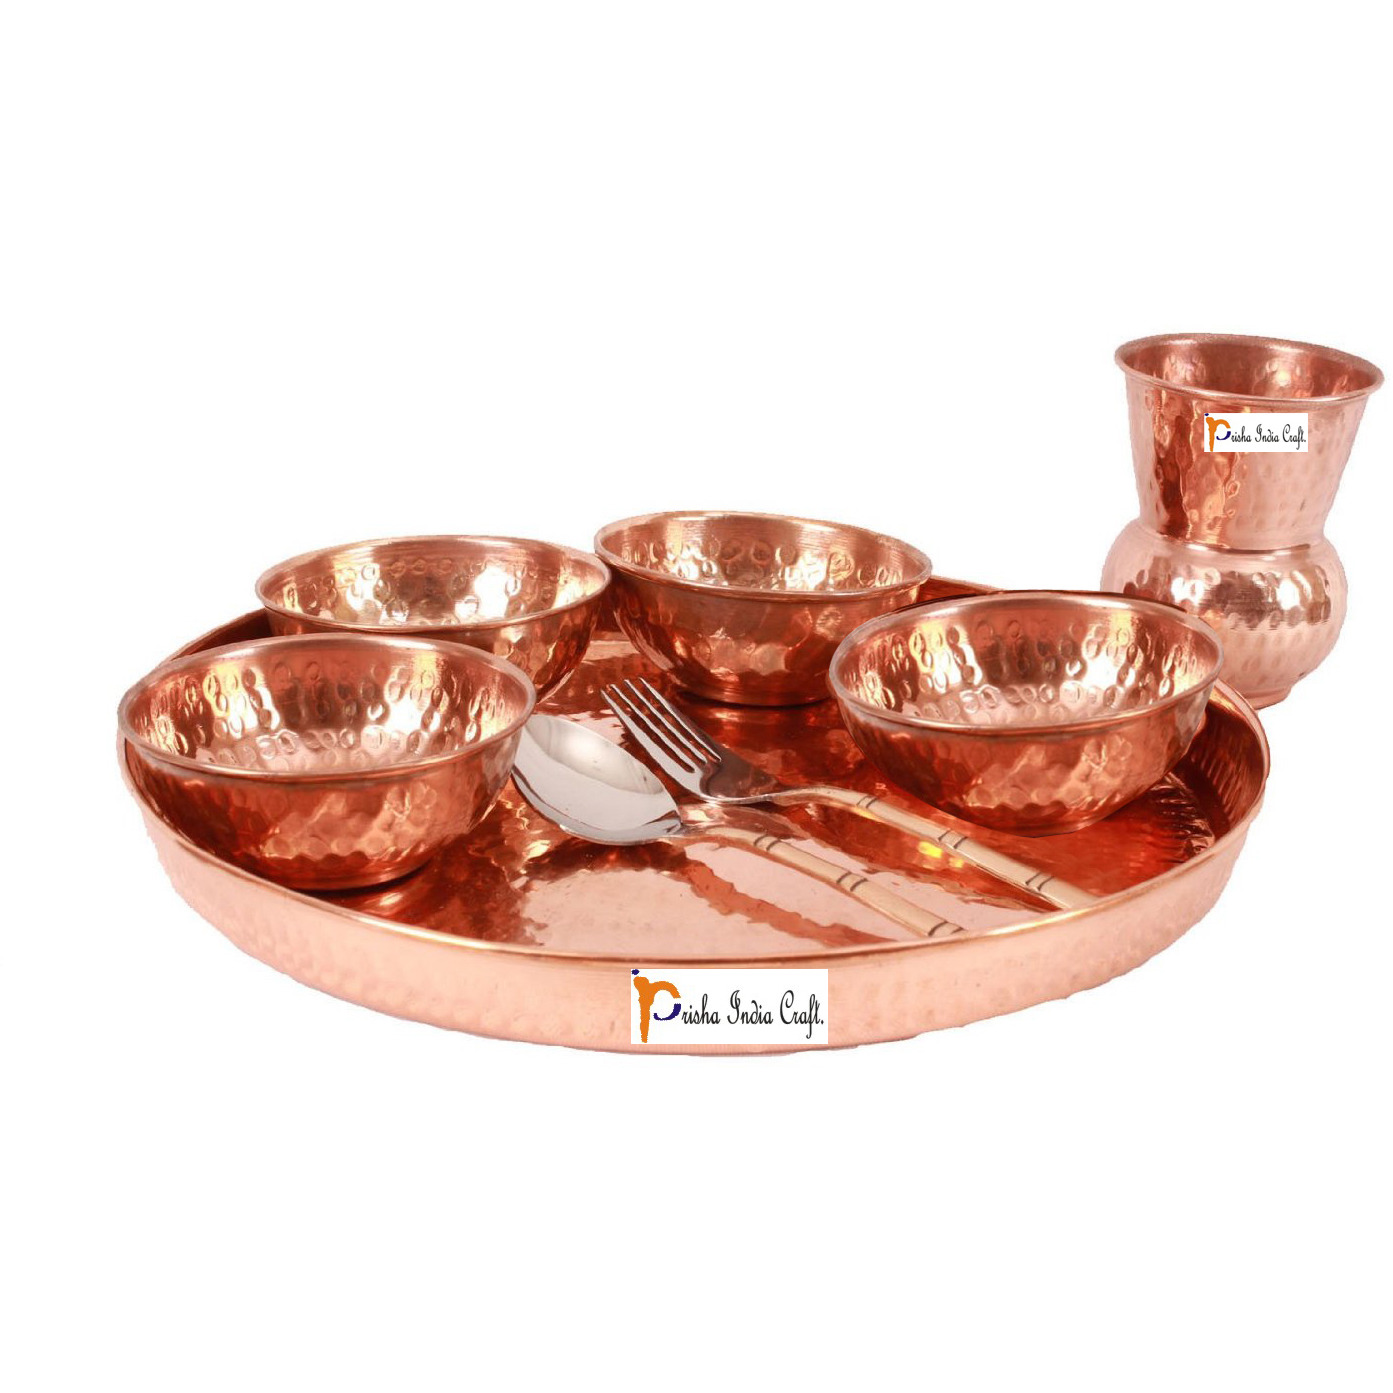 Prisha India Craft B. Set of 4 Dinnerware Traditional 100% Pure Copper Dinner Set of Thali Plate, Bowls, Glass and Spoon, Dia 12  With 1 Pure Copper Embossed Pitcher Jug - Christmas Gift